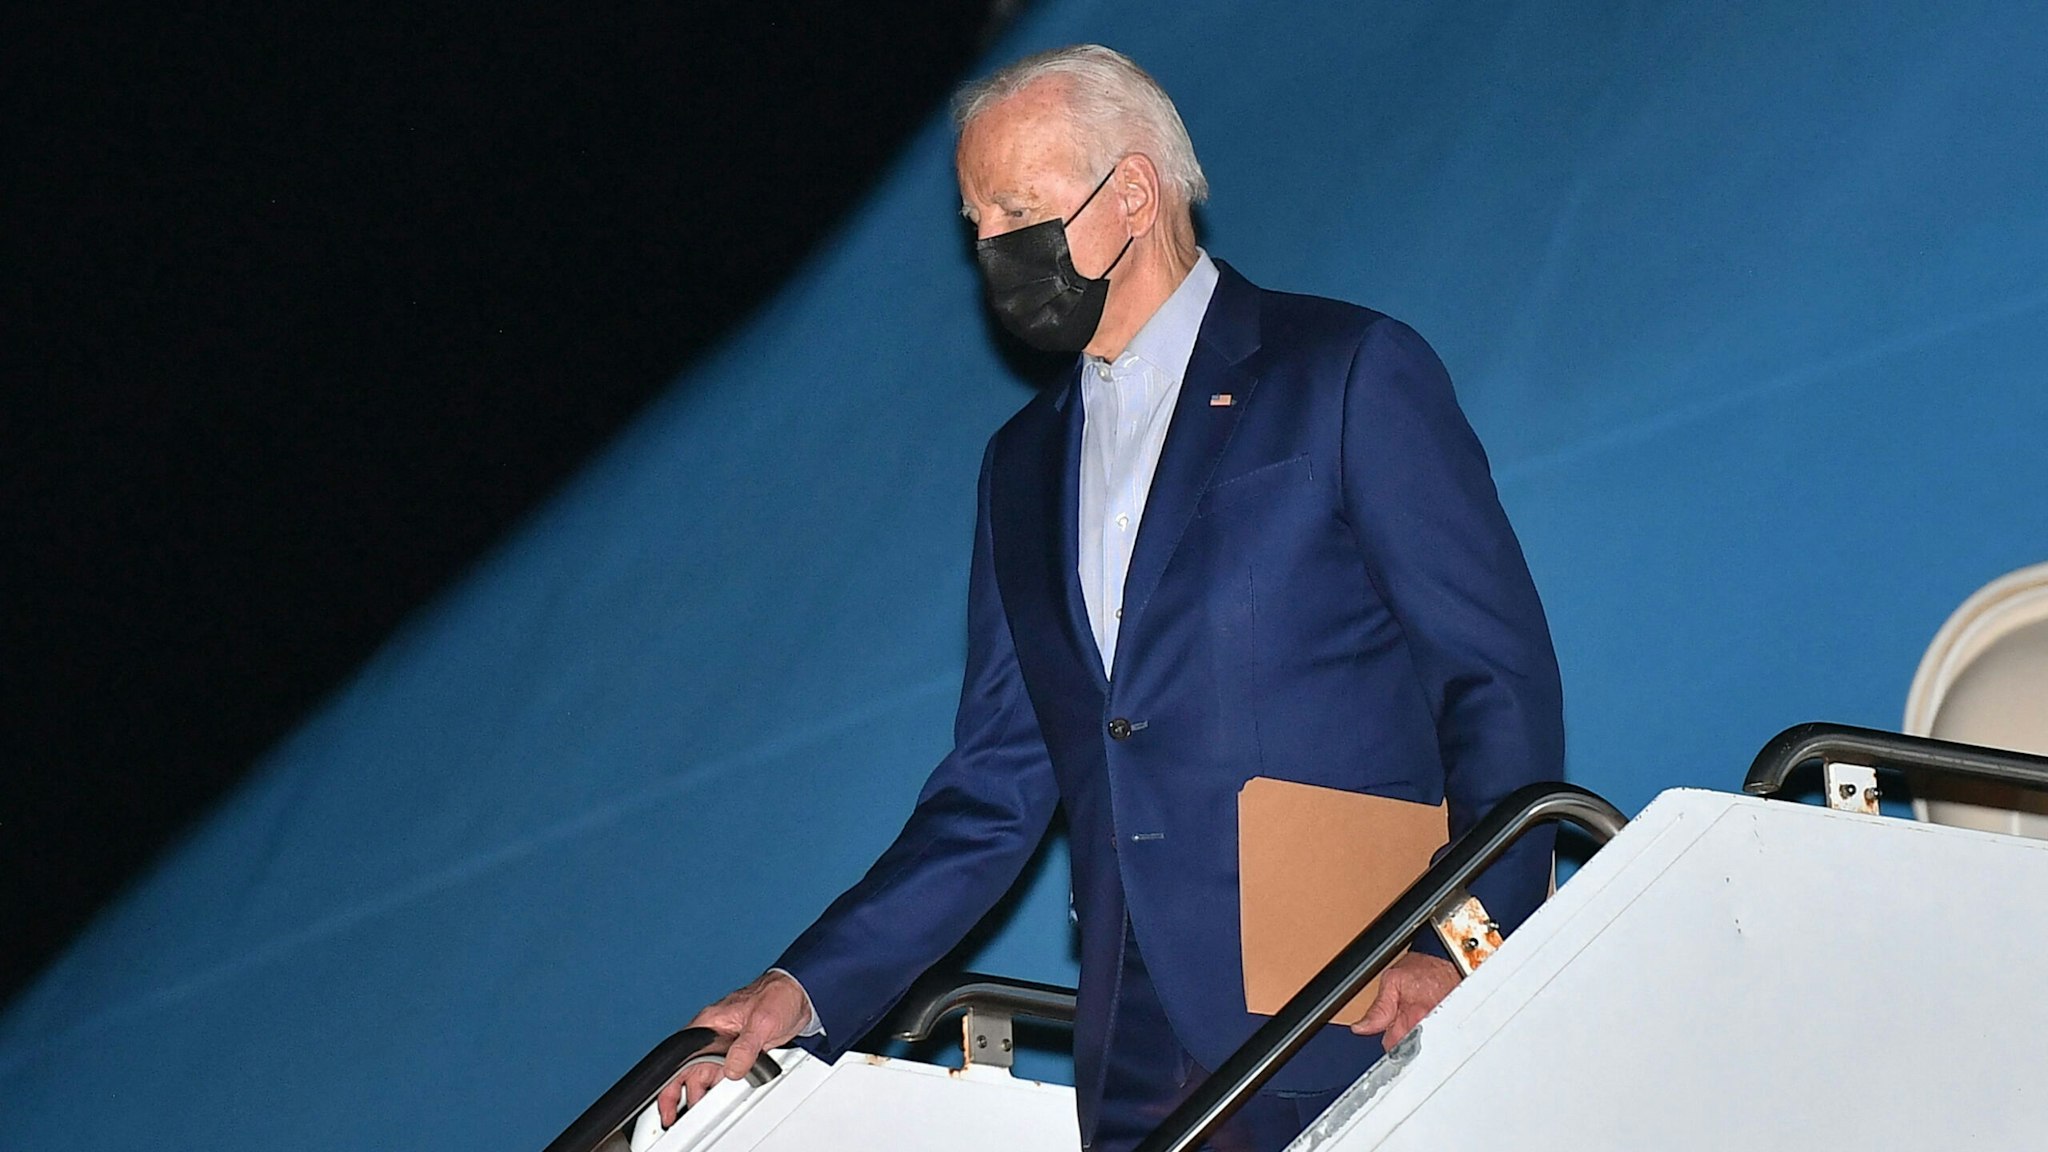 US President Joe Biden steps off Air Force One upon arrival at Philadelphia International Airport in Philadelphia, Pennsylvania on September 3, 2021. - Biden is heading to Wilmington, Delaware to spend the weekend at his residence.